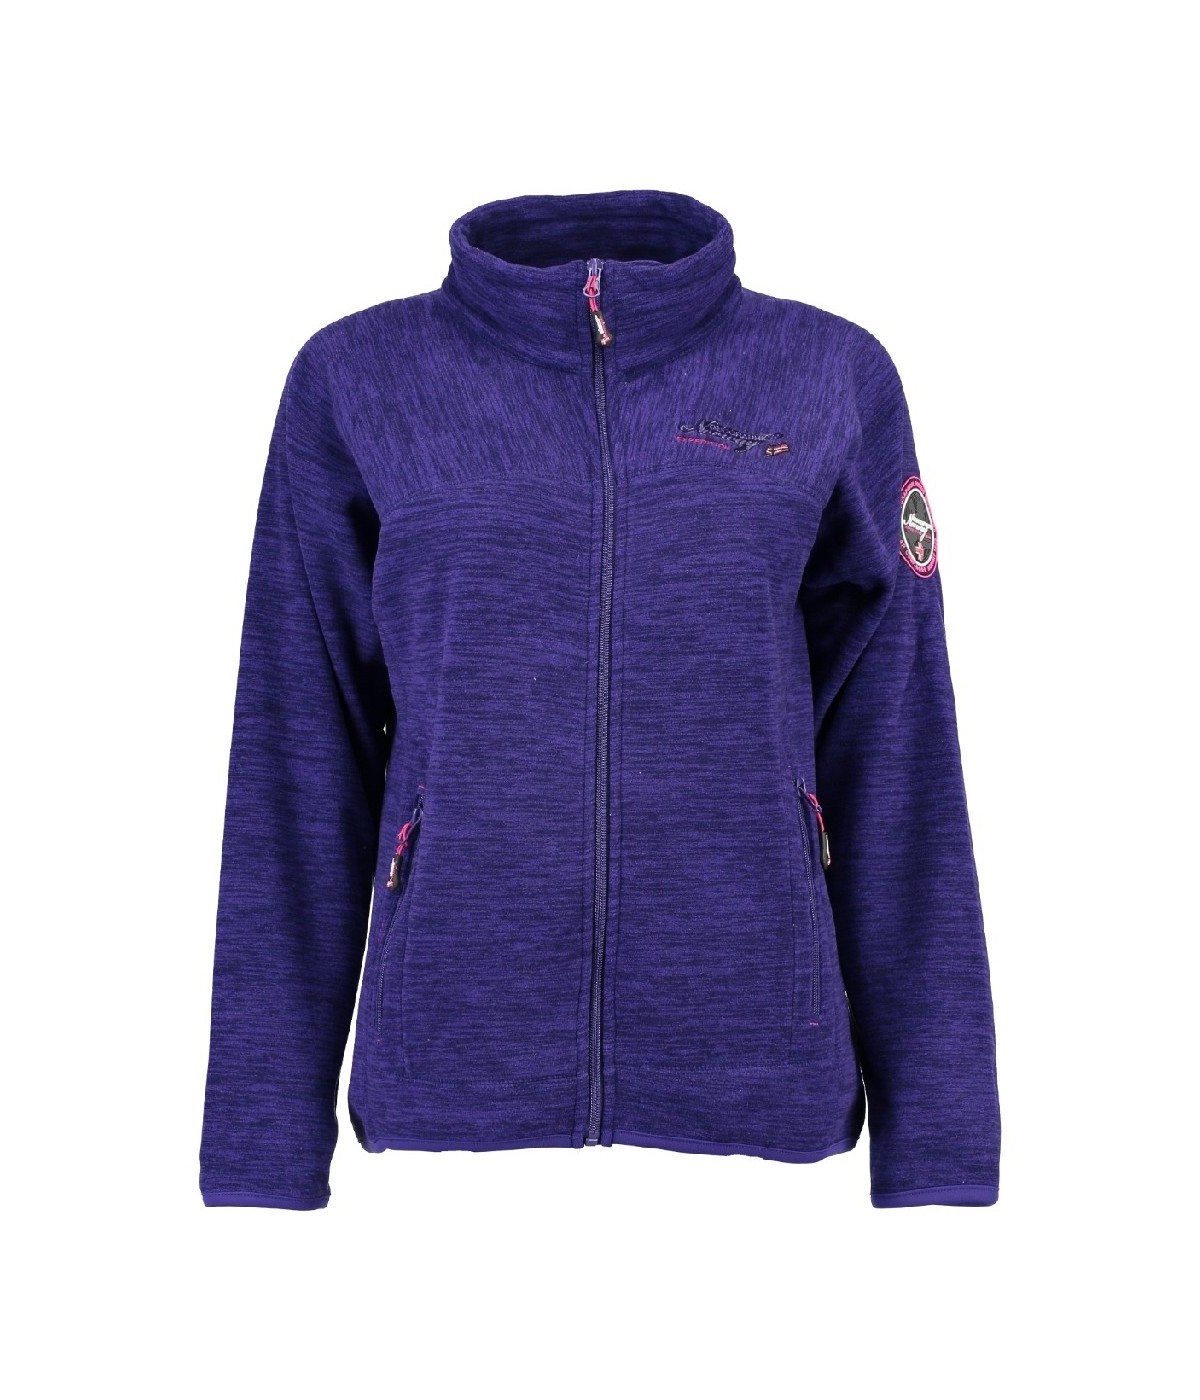 Polaire Fille Geographical Norway Tyrell Violet